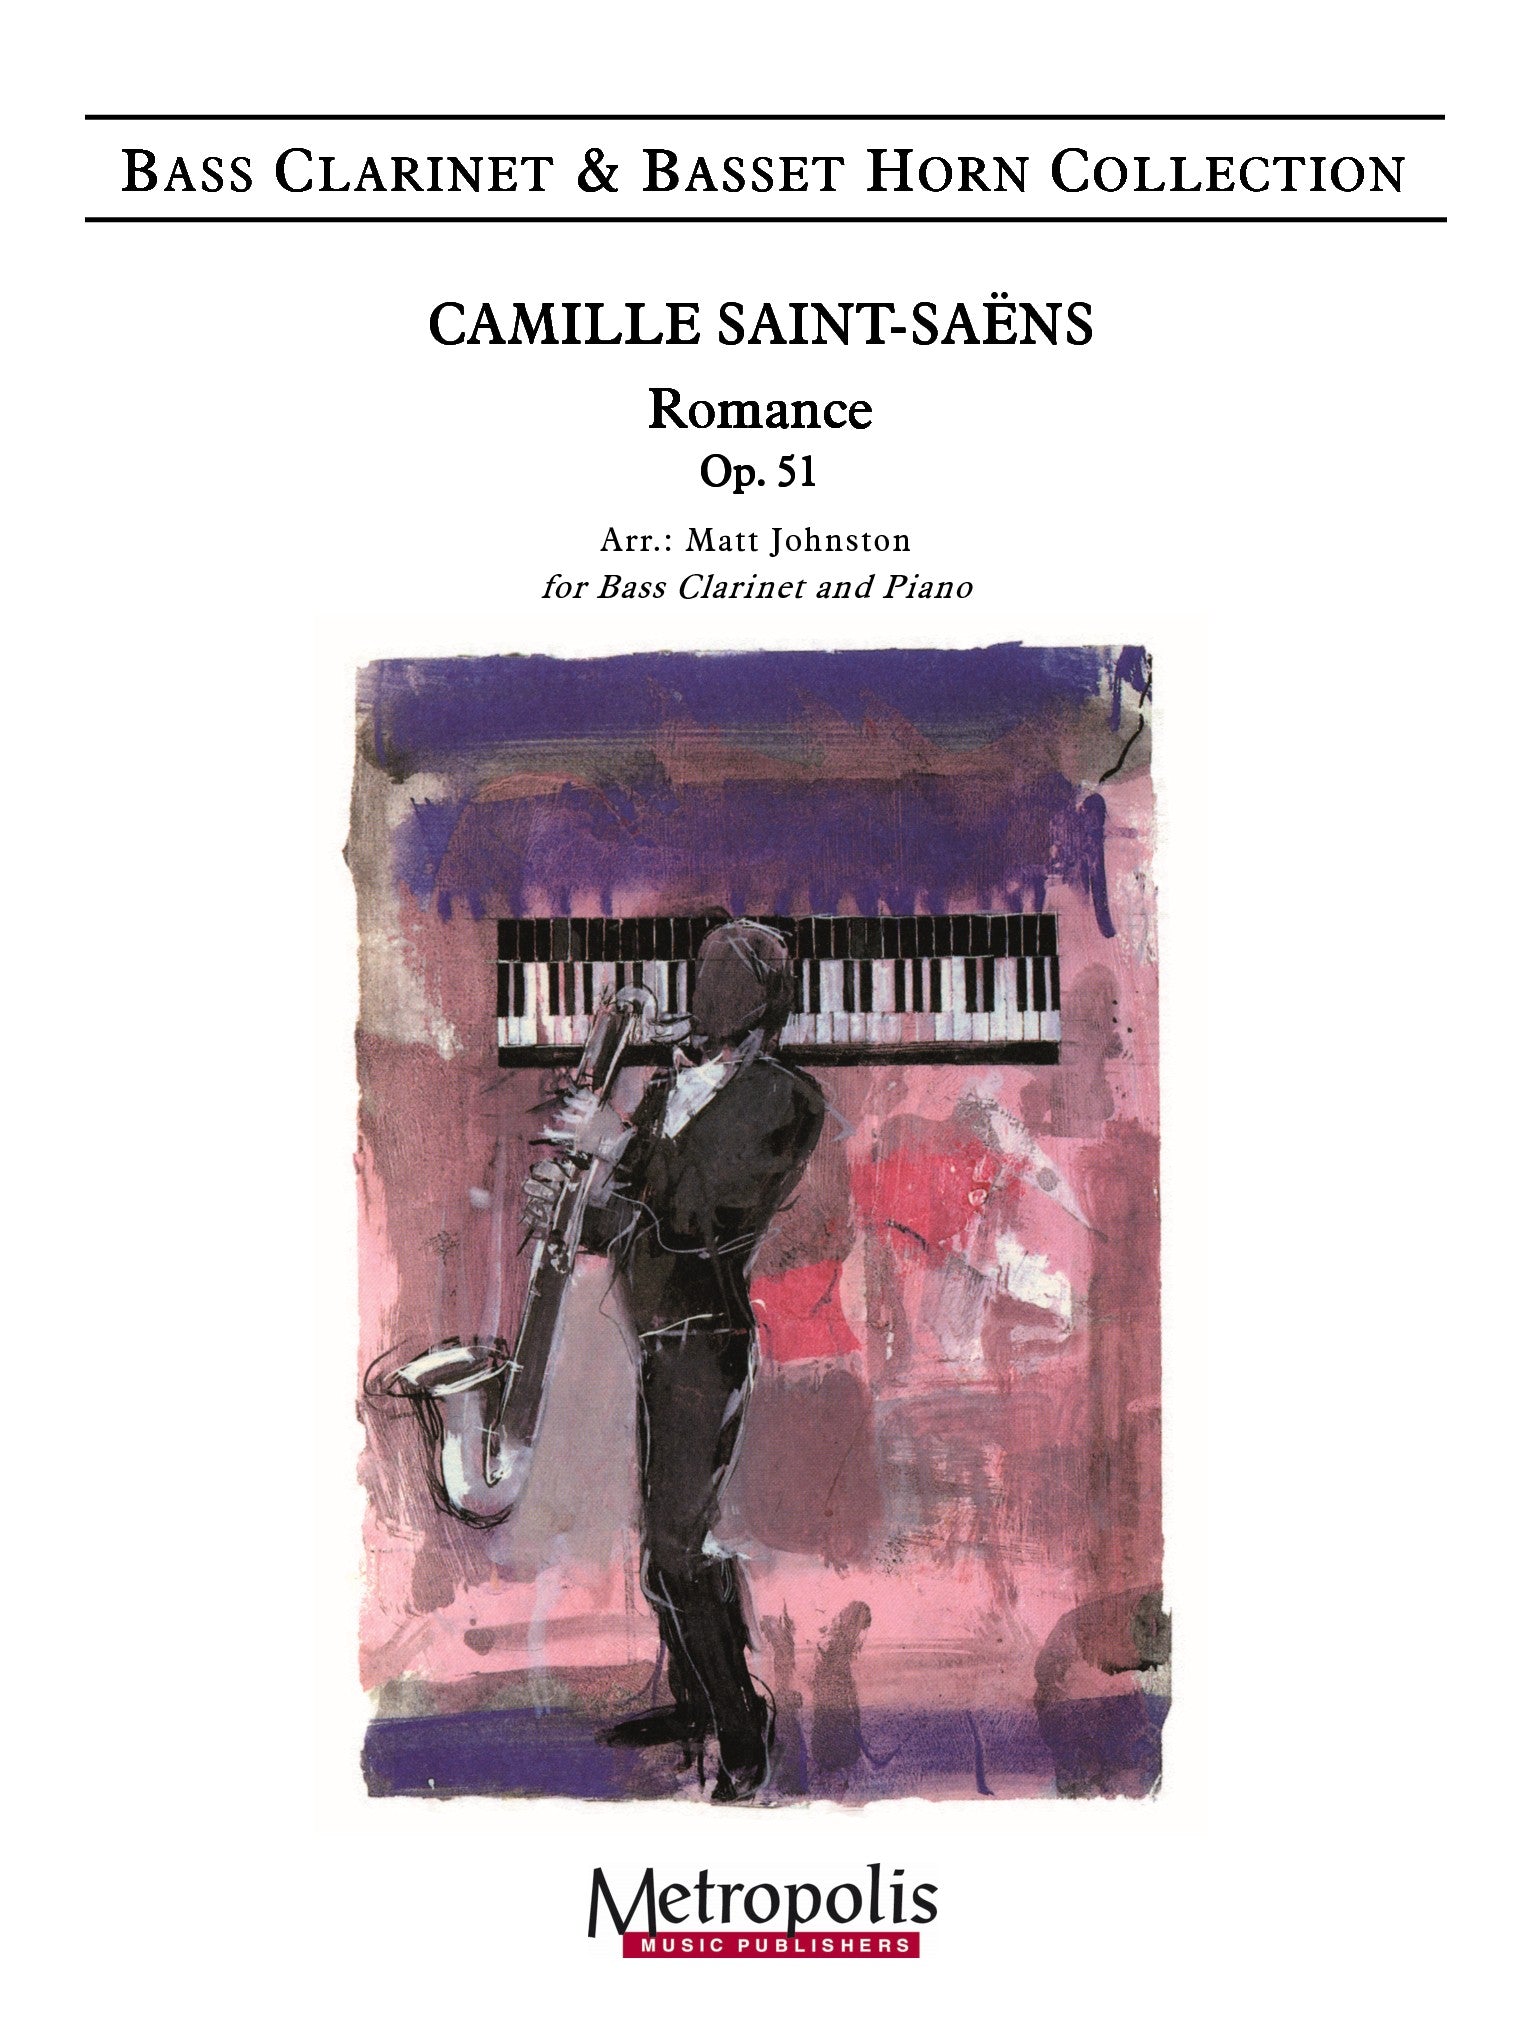 Saint-Saens - Romance, Op. 51 for Bass Clarinet and Piano